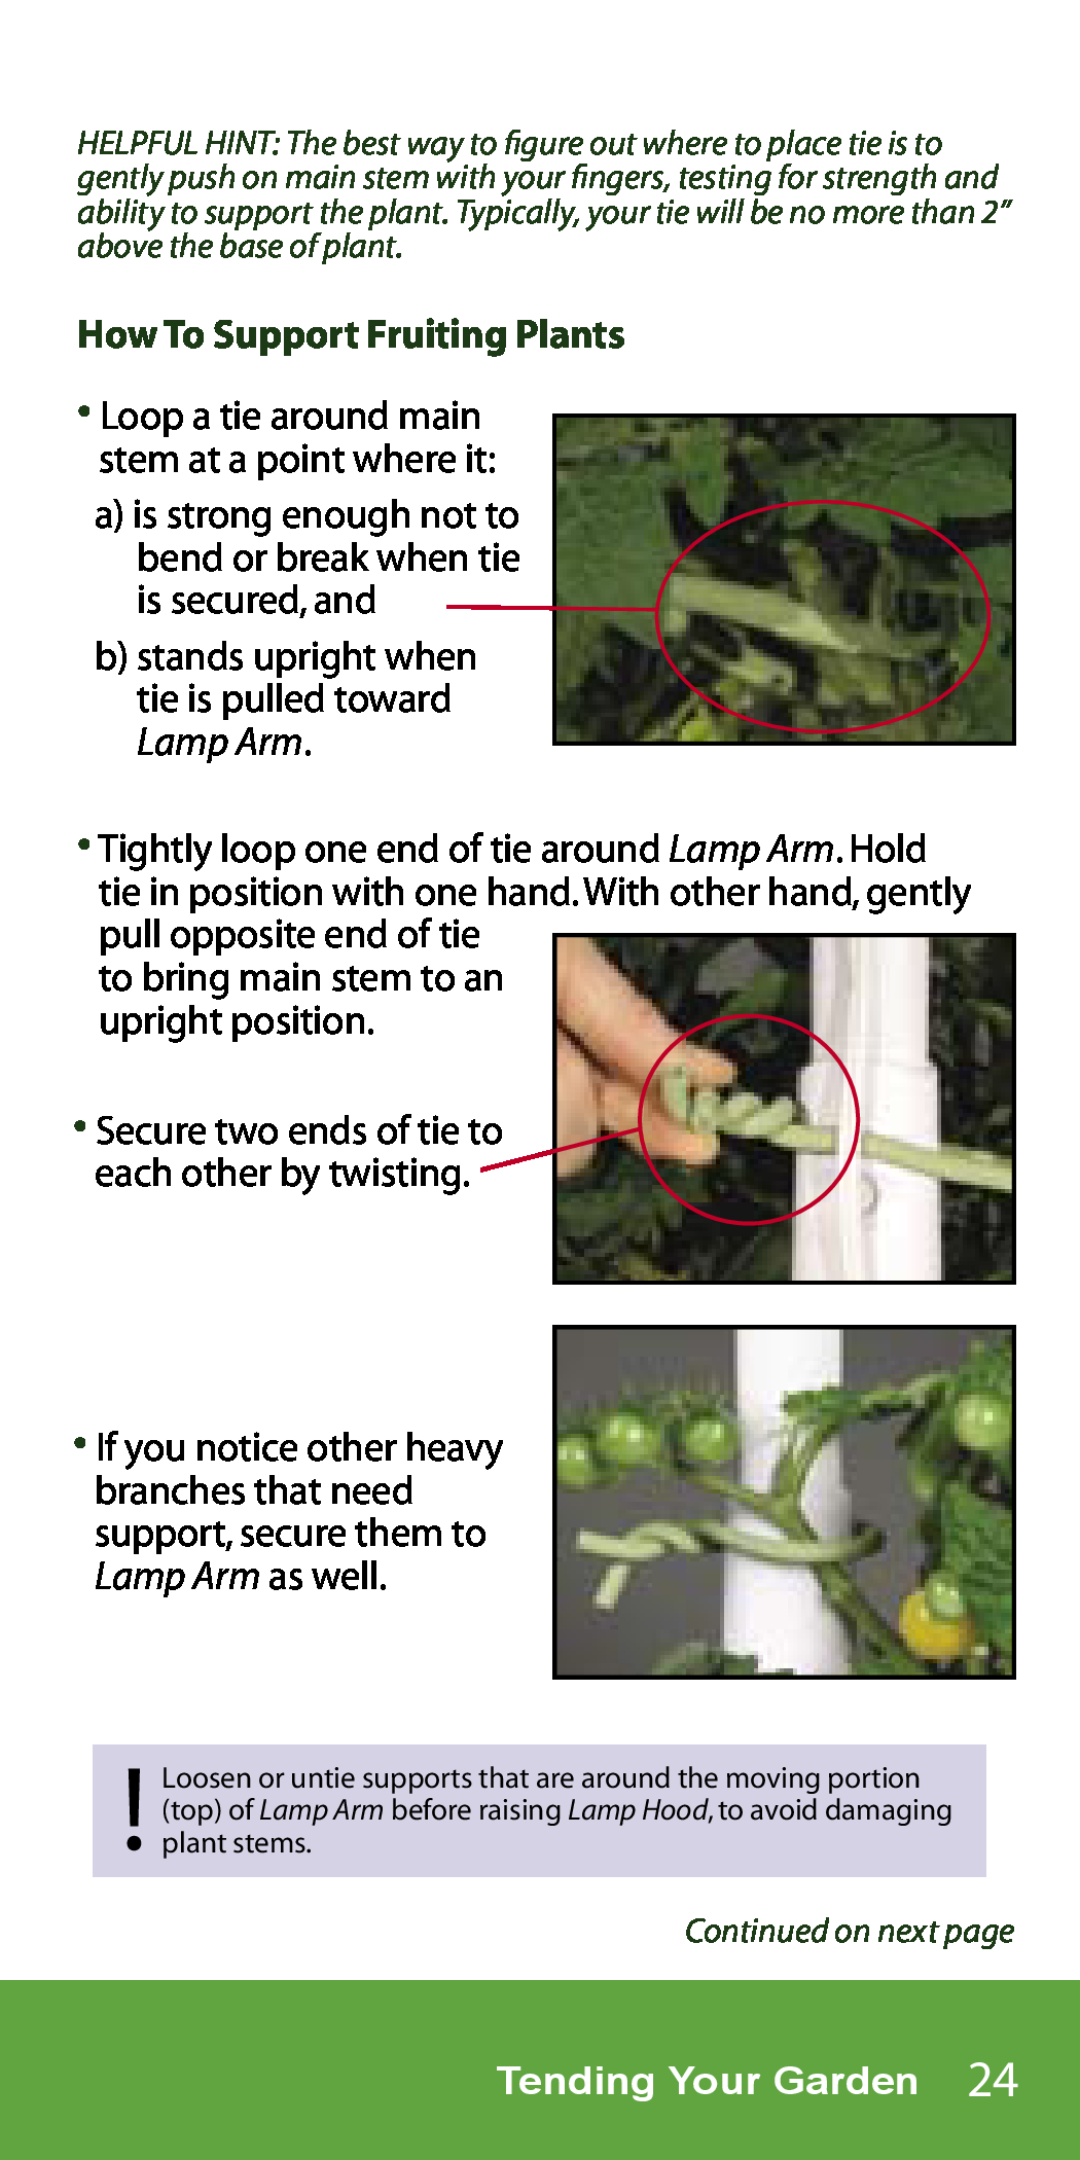 AeroGarden 1-Season, 7-Pod manual How To Support Fruiting Plants, b stands upright when tie is pulled toward Lamp Arm 